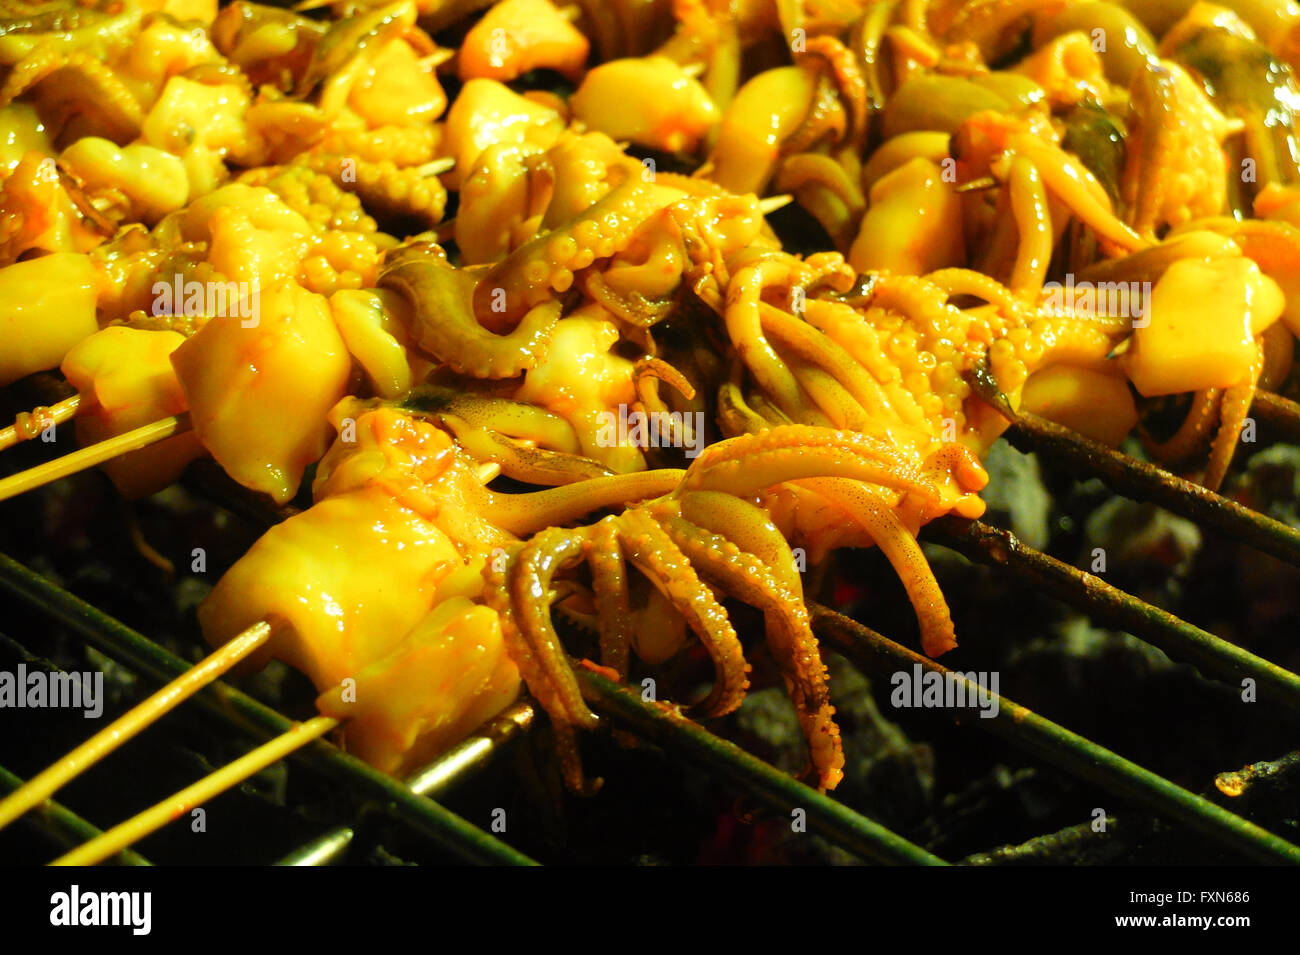 Asian style barbecued baby octopus on wooden skewers. Stock Photo